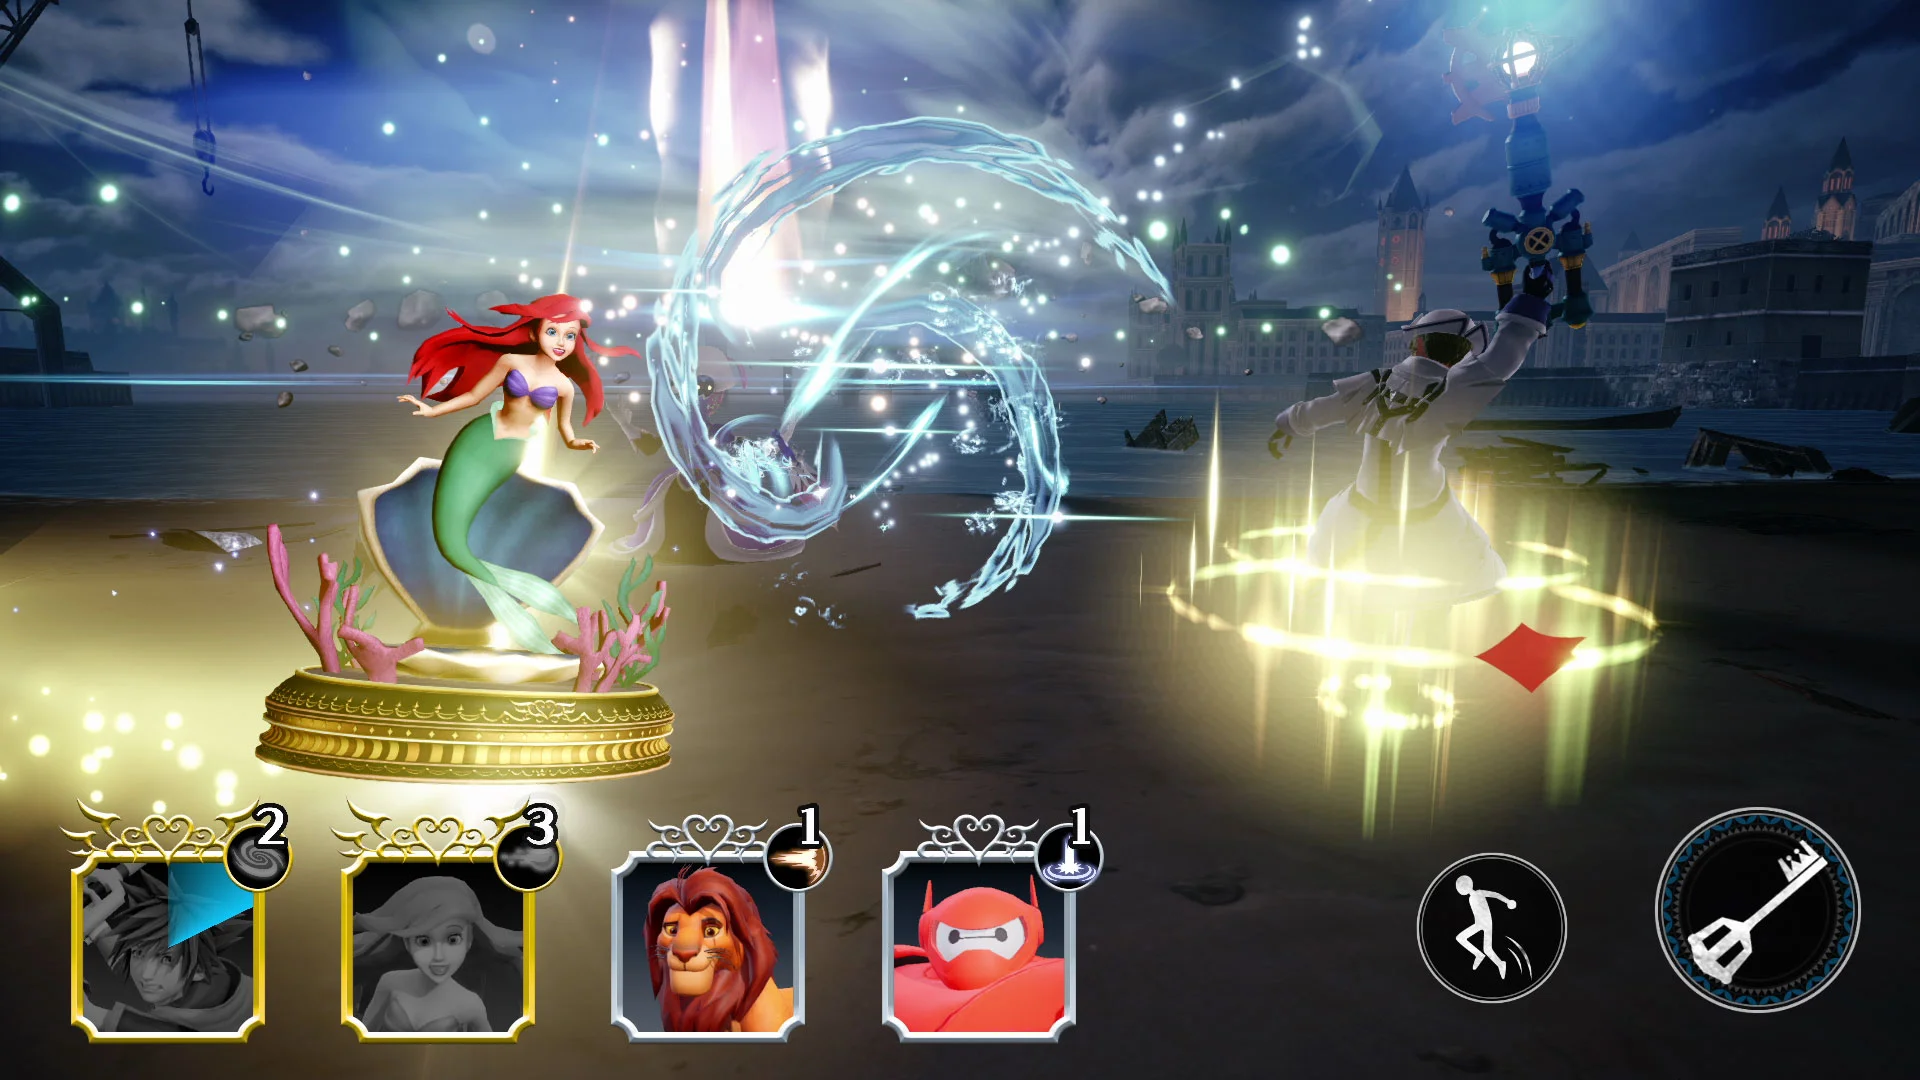 Kingdom Hearts: Missing Link Gameplay Details Shared - Siliconera